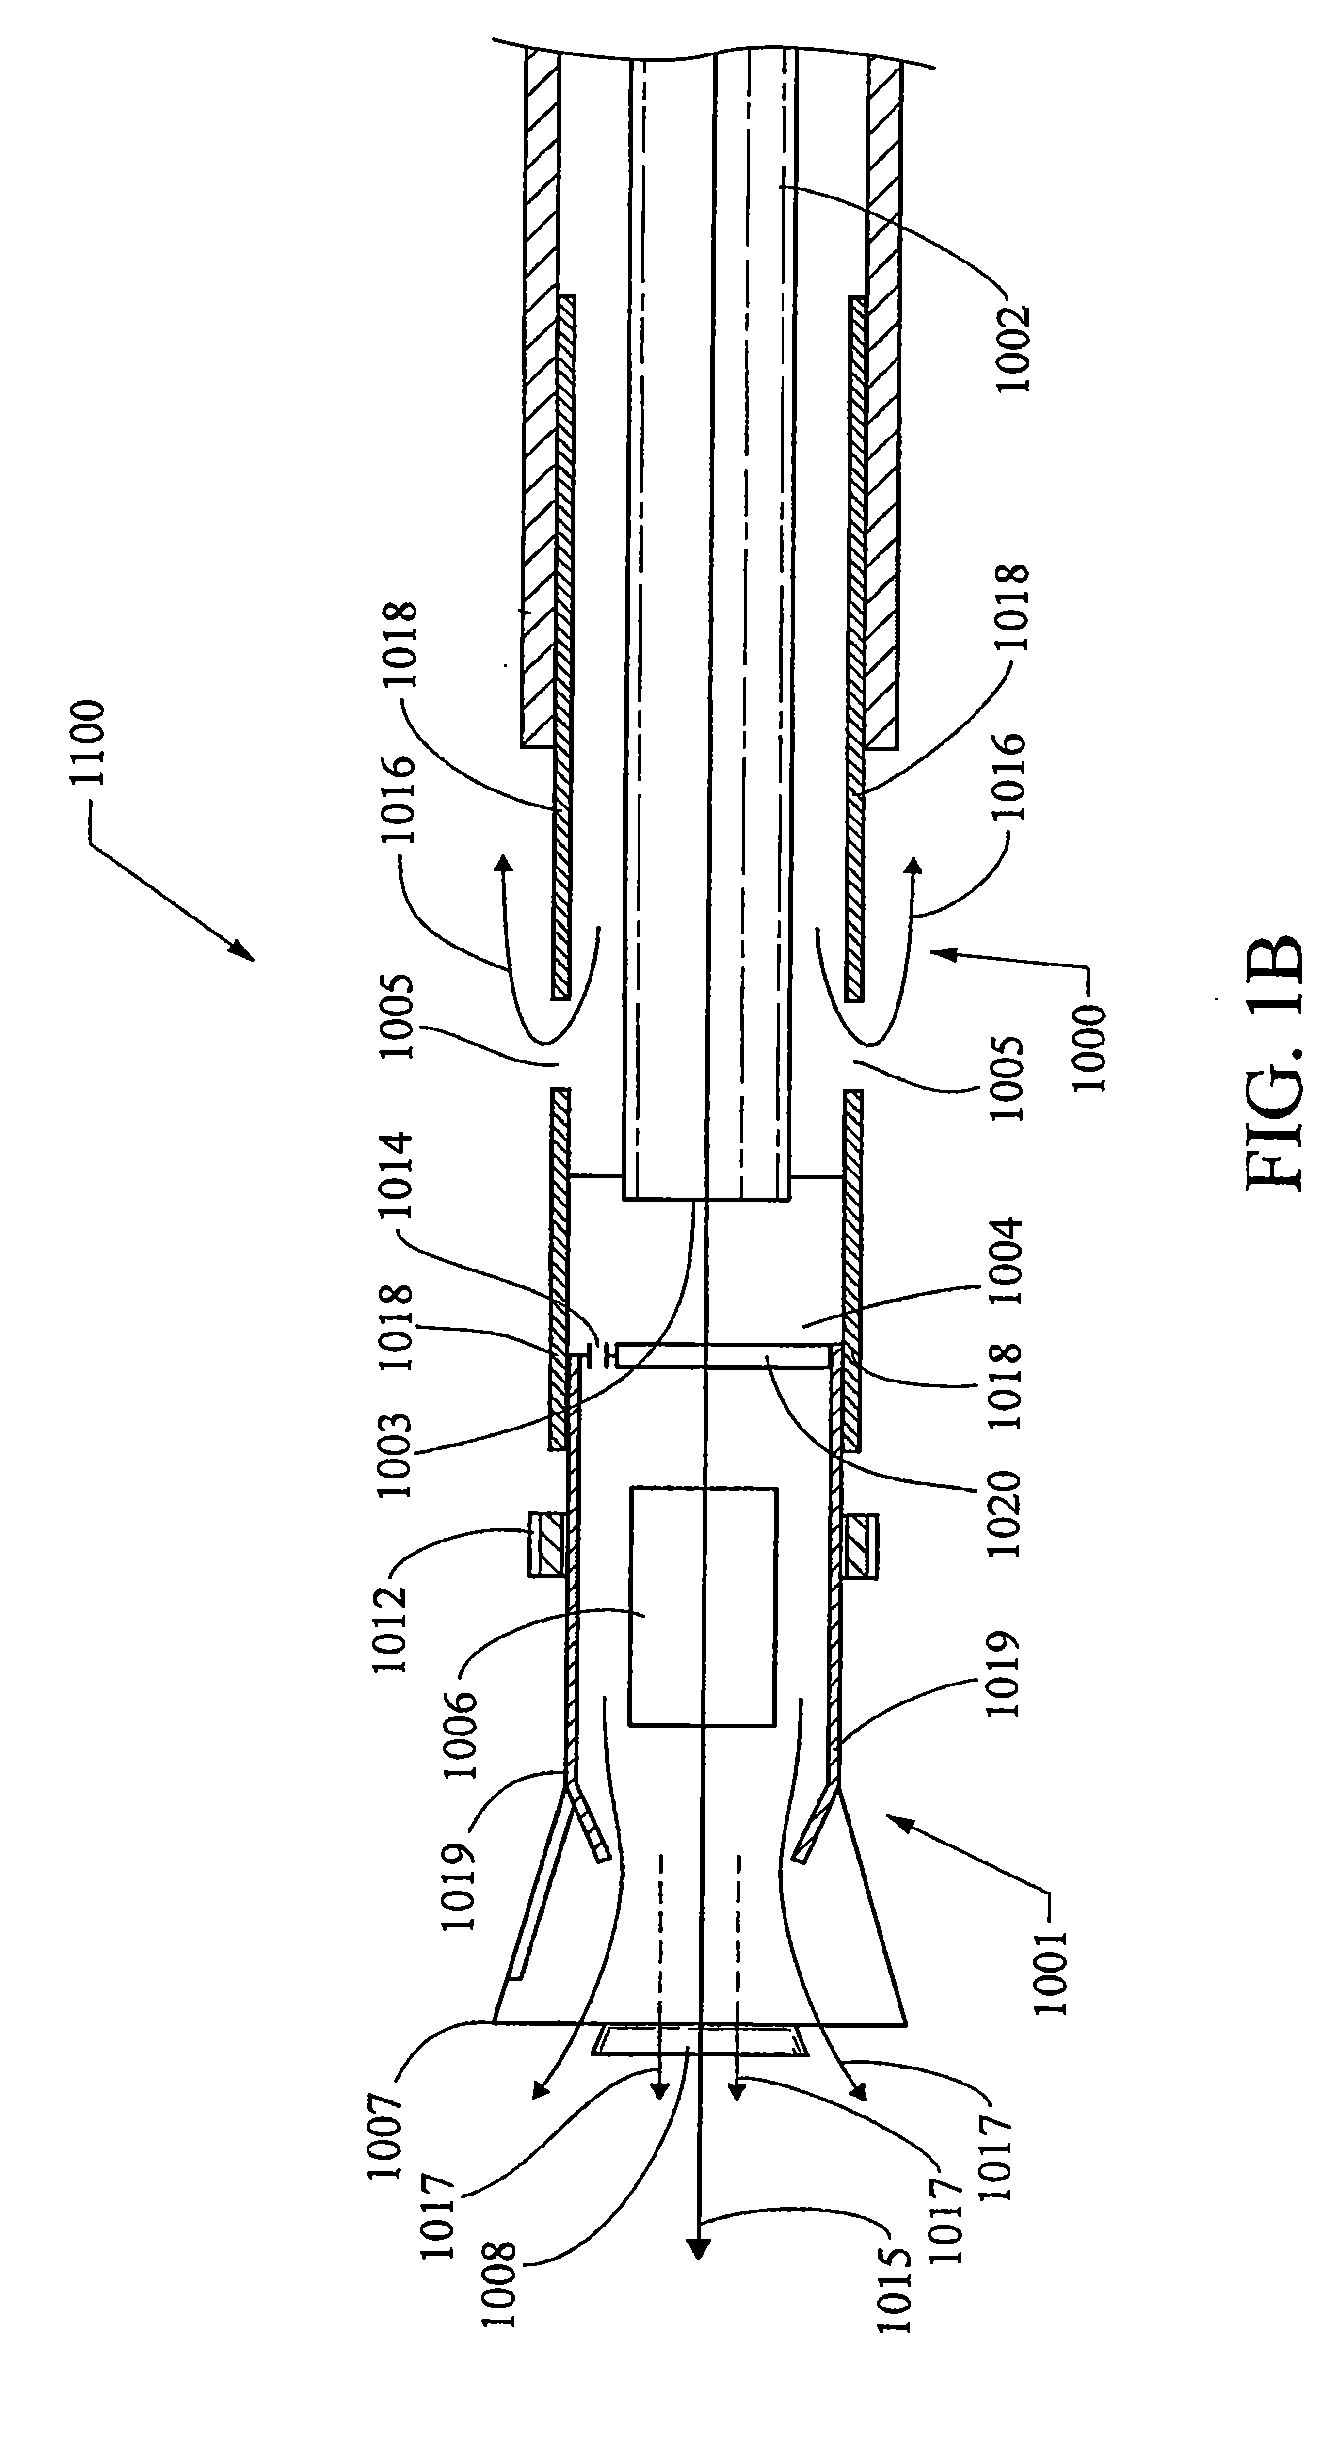 Apparatus for Advancing a Wellbore Using High Power Laser Energy